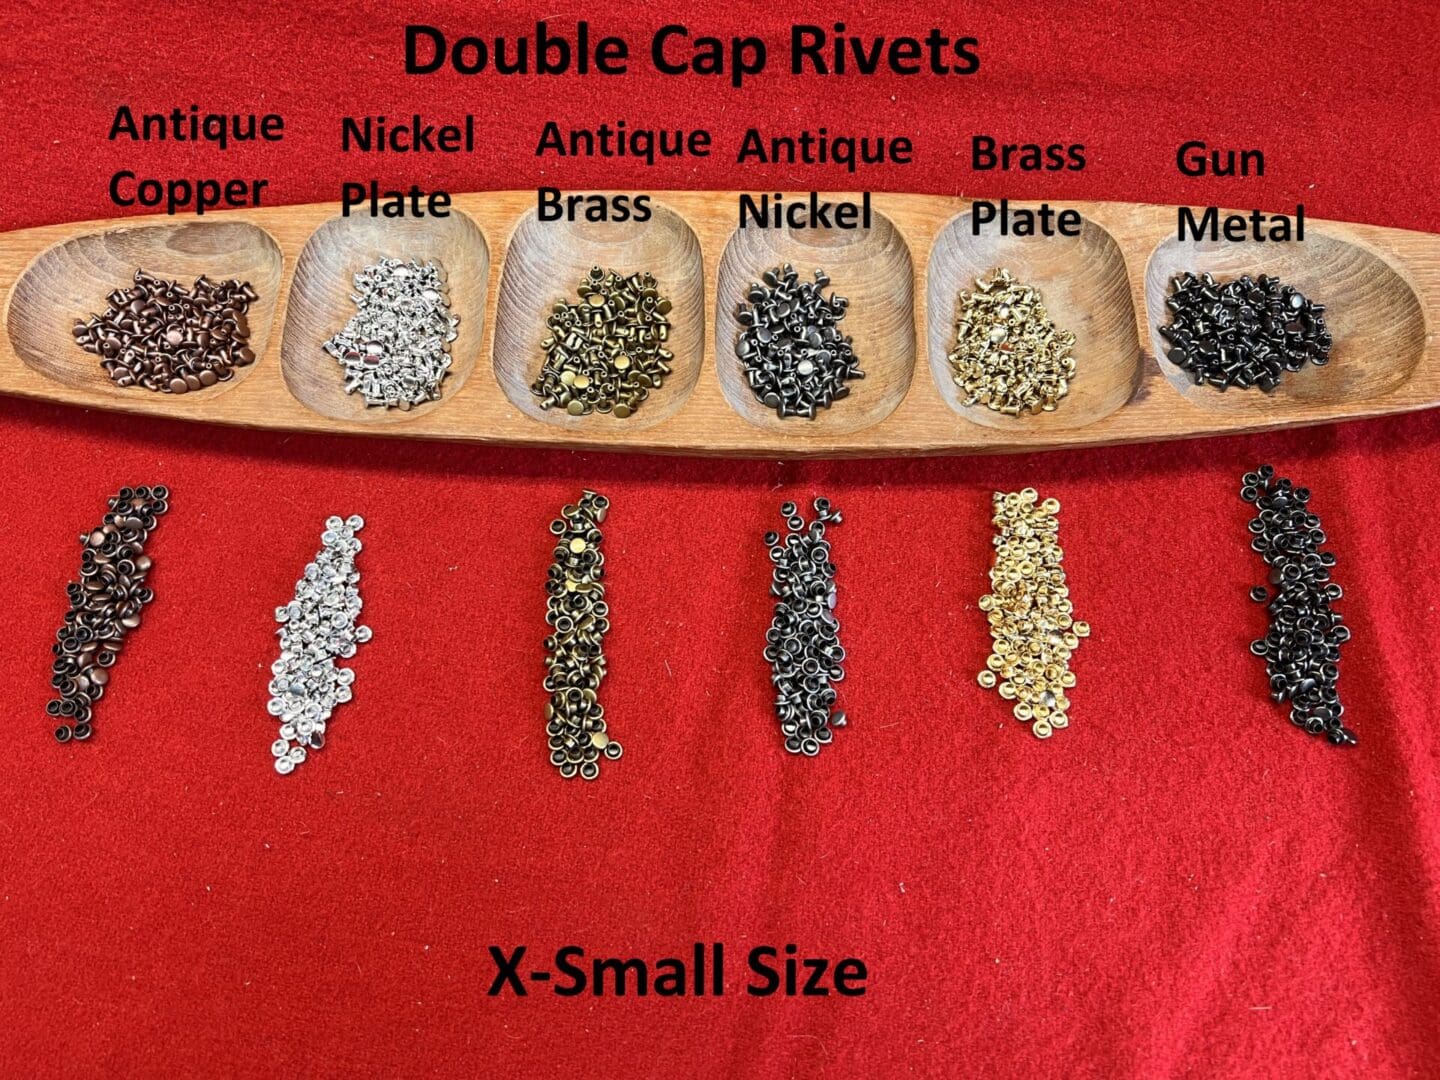 X Small Size Double Cap Rivets Available in Six Colors